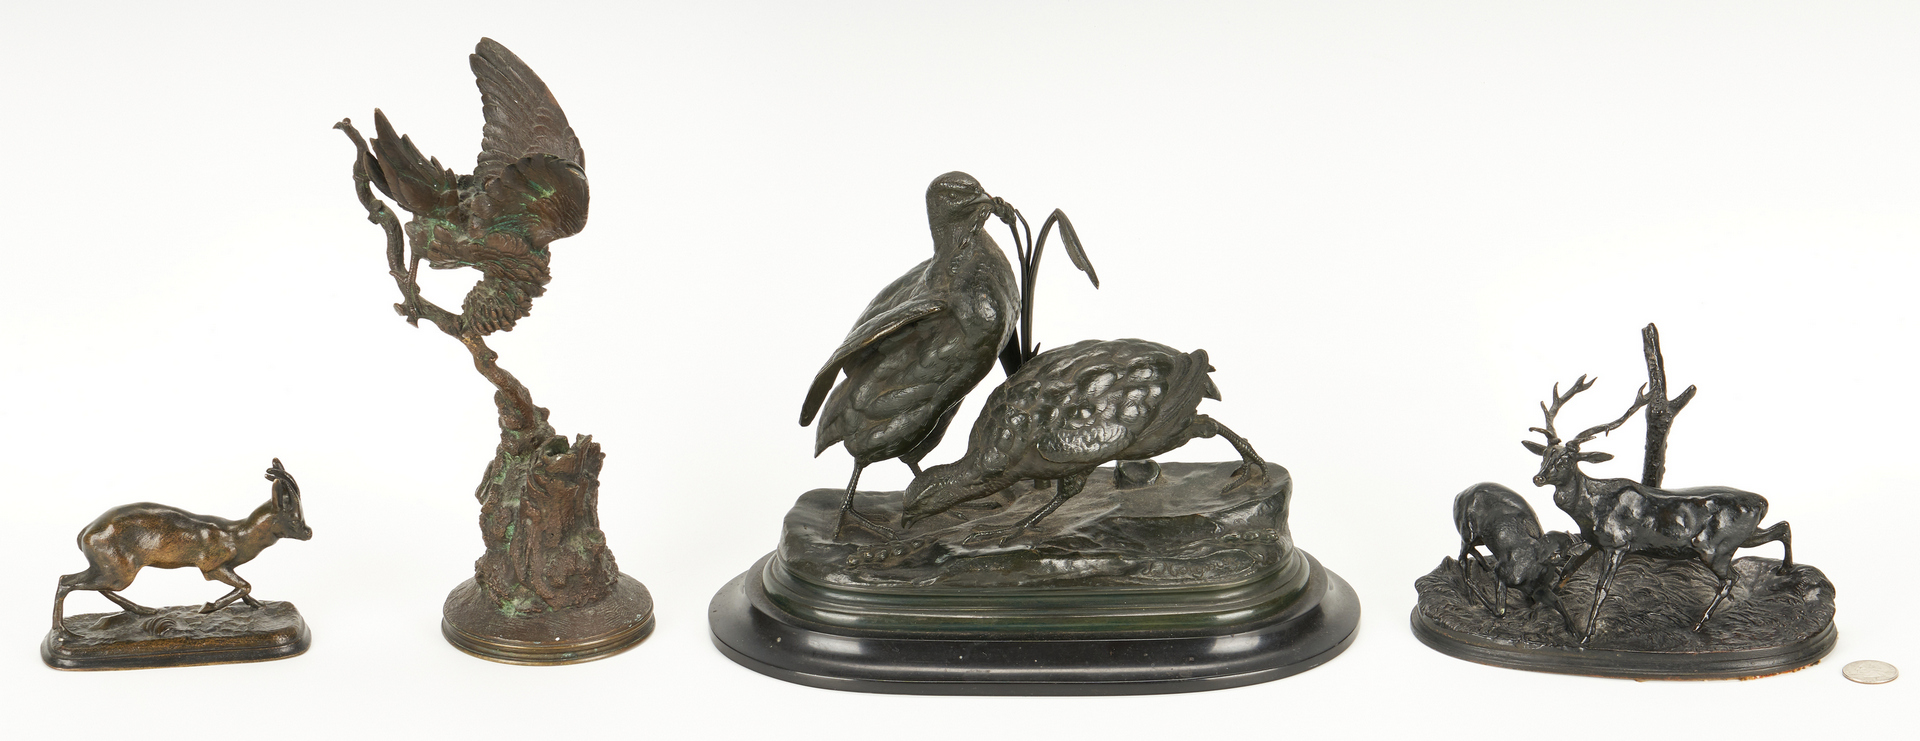 Lot 334: 4 French Bronze Animal Sculptures | Case Auctions